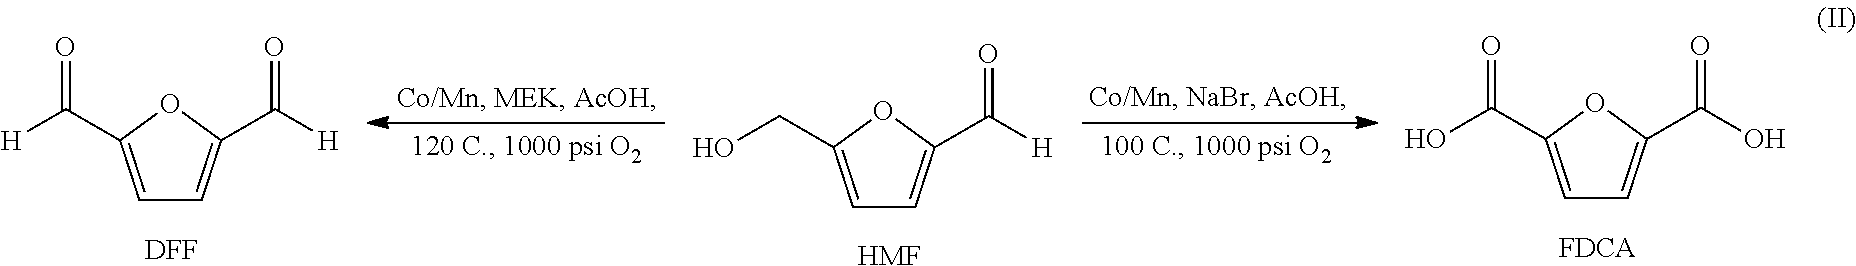 Oxidation of furfural compounds